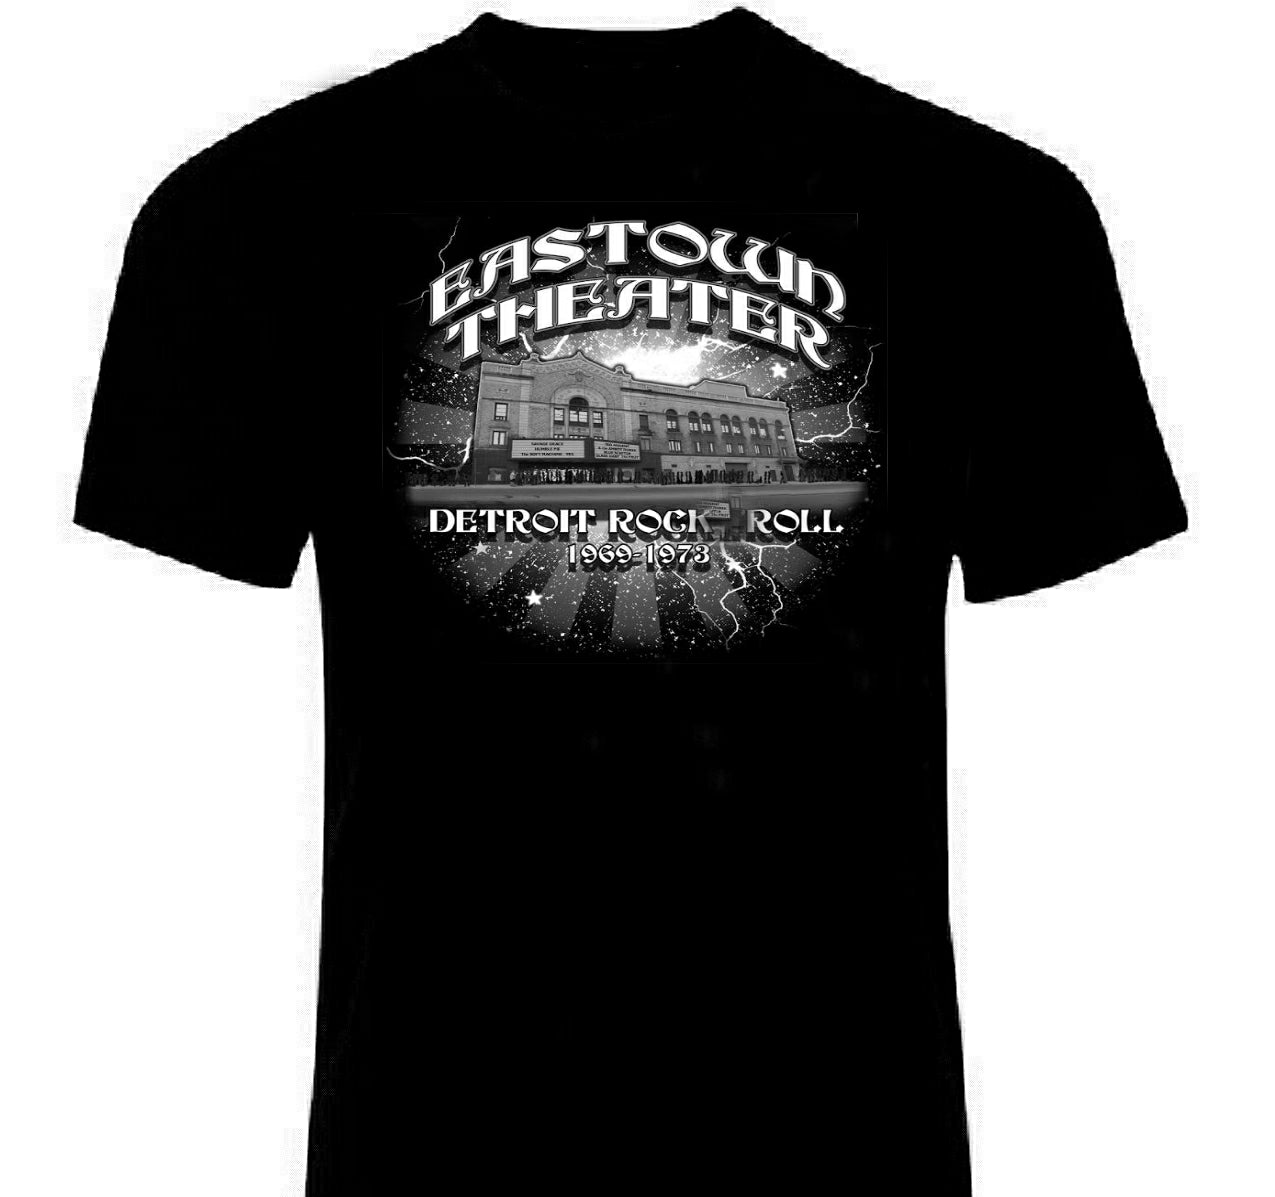 eastown theater t shirt - Lost In Sound Detroit